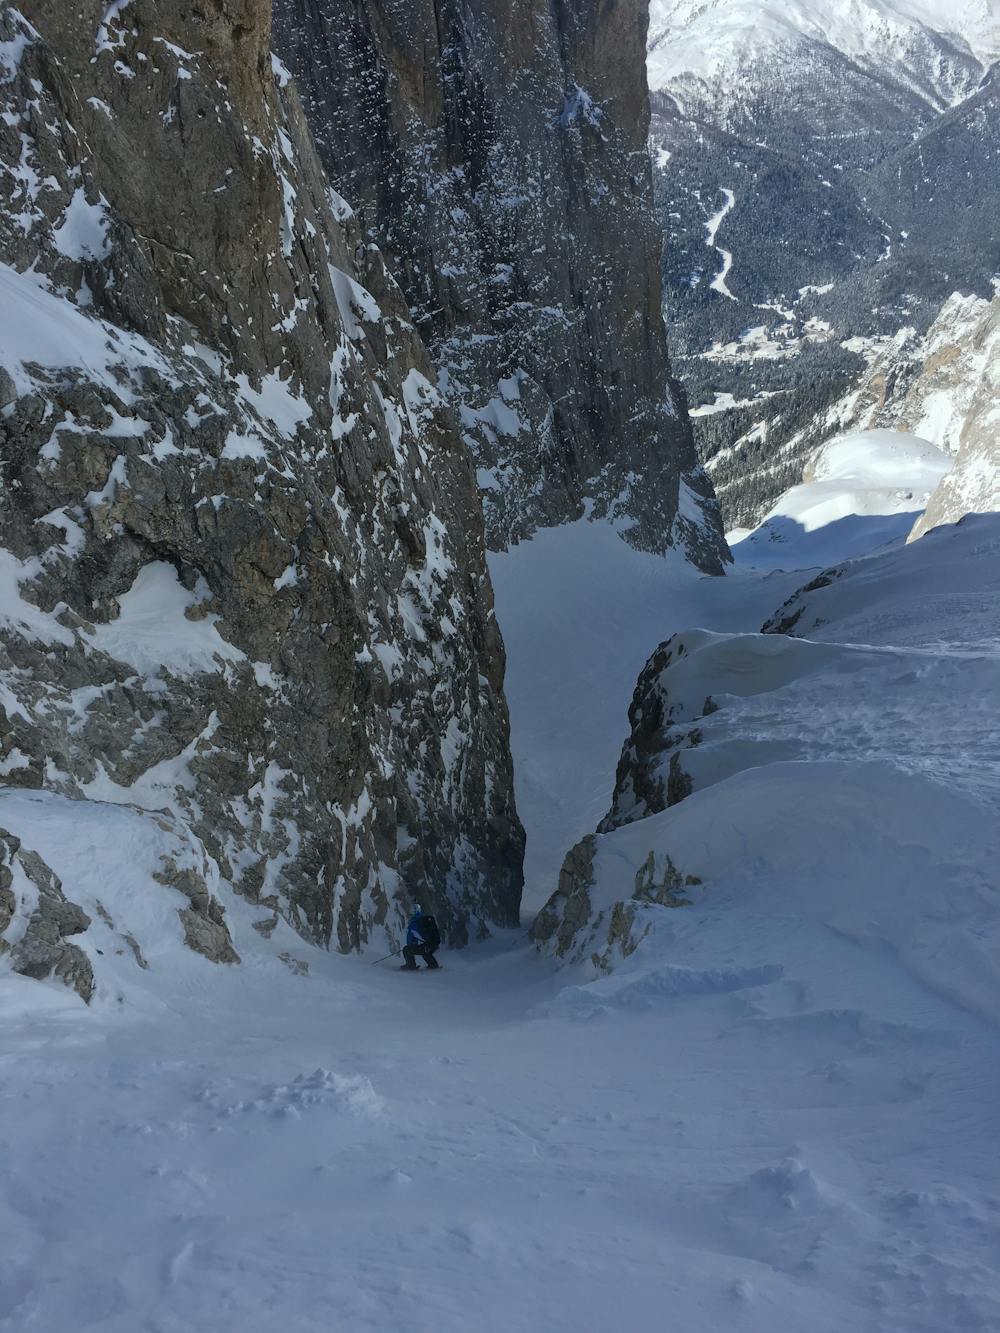 Couloir from the top